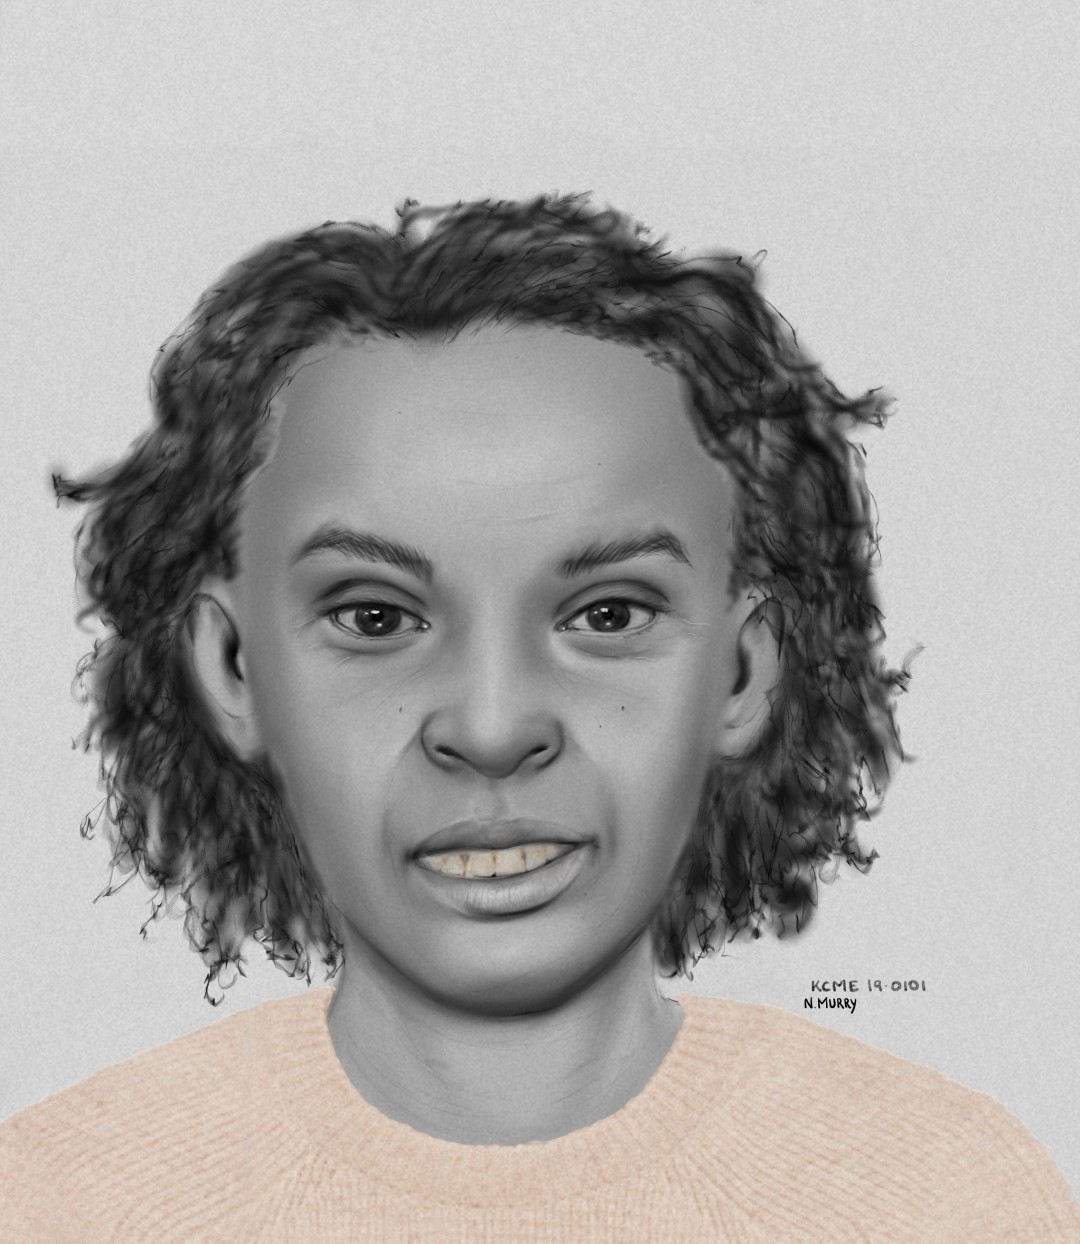 Unidentified adult mixed race female: Case #19-0101